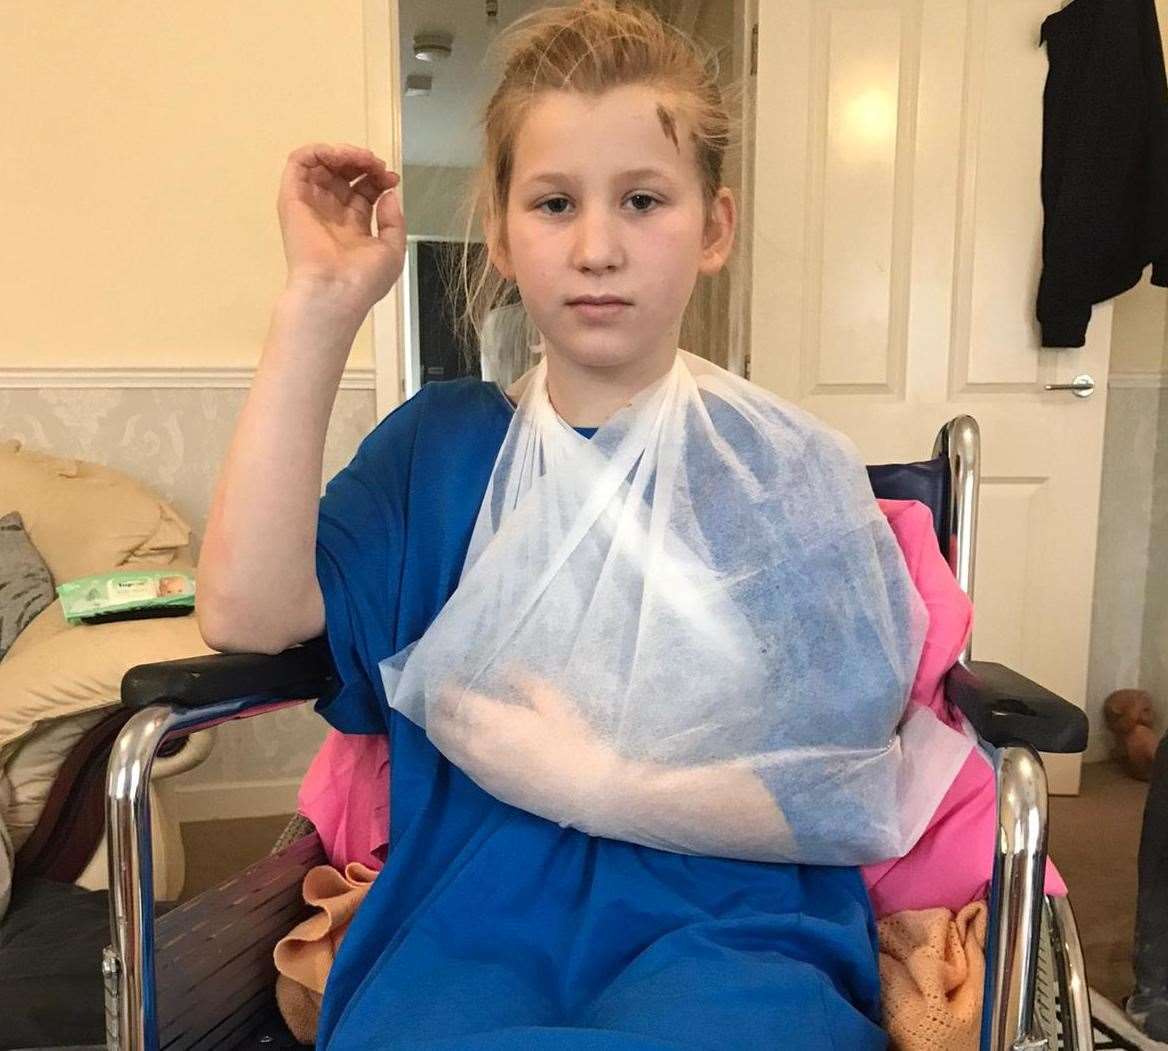 Emma-Jane was hit by a car on Sunday